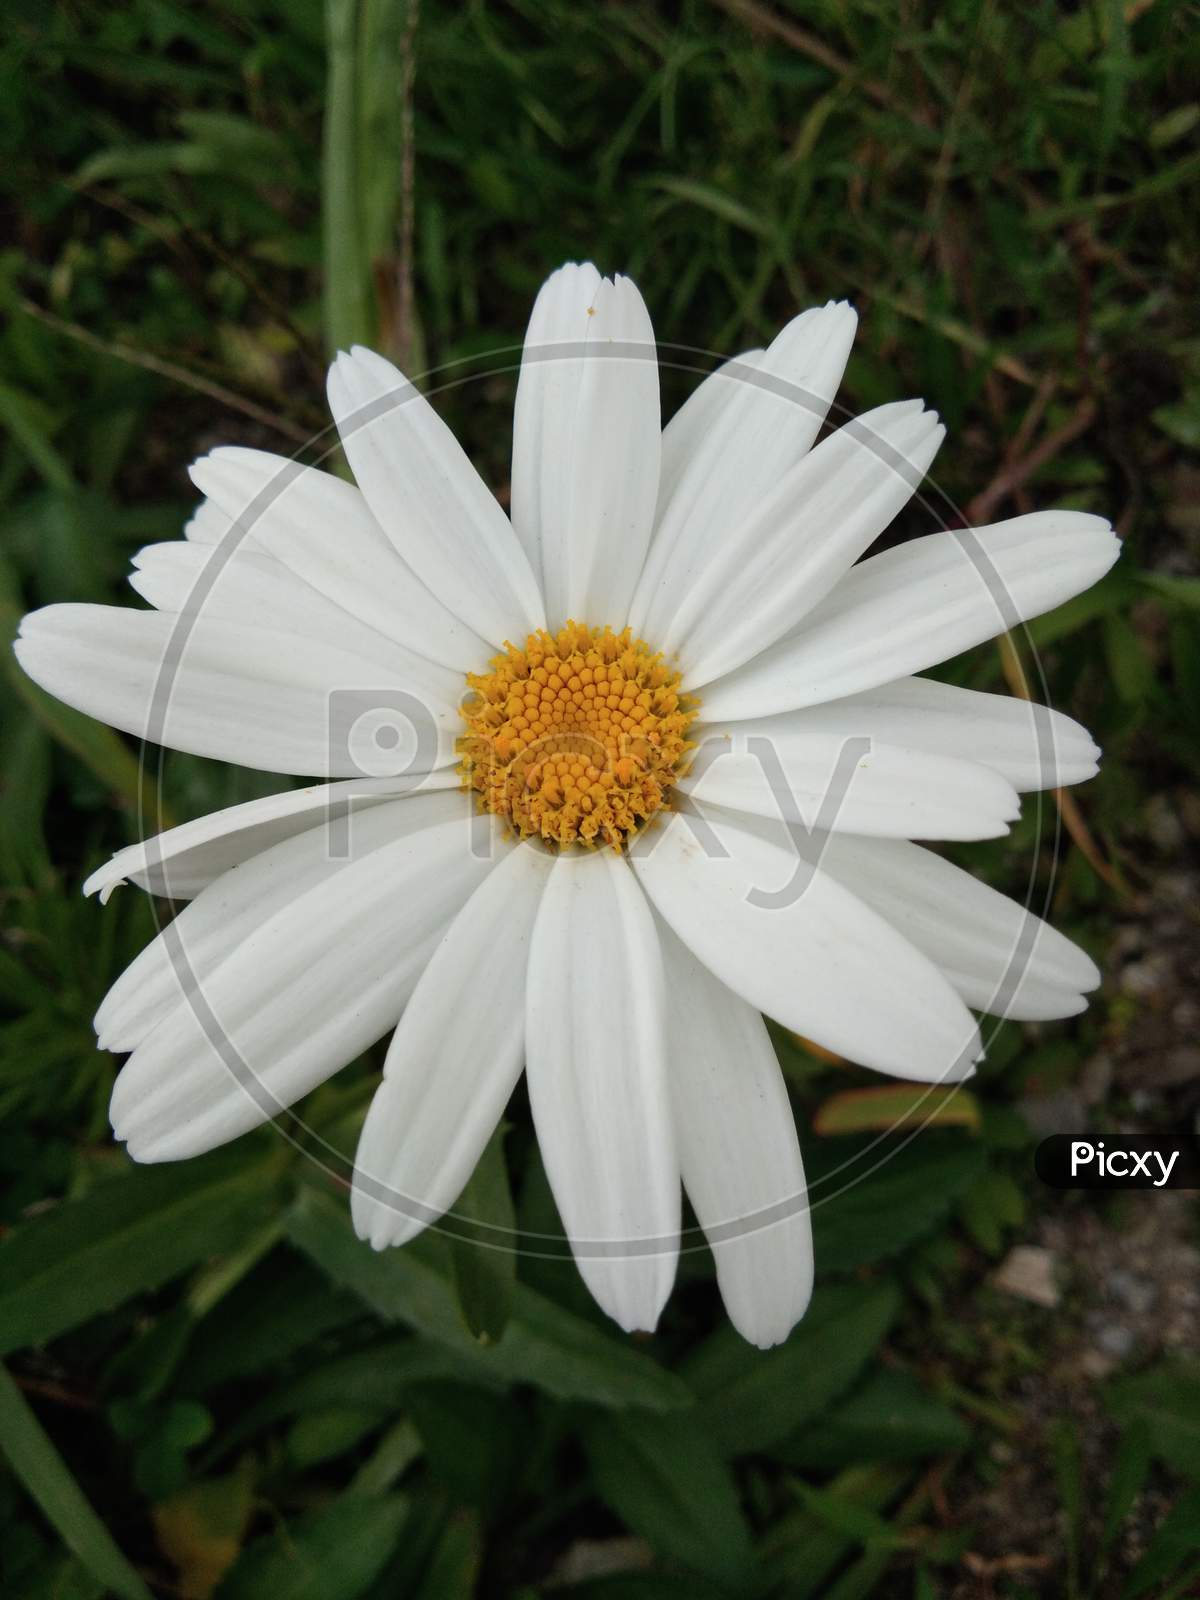 This is very beautiful white and yellow mix petal flower.